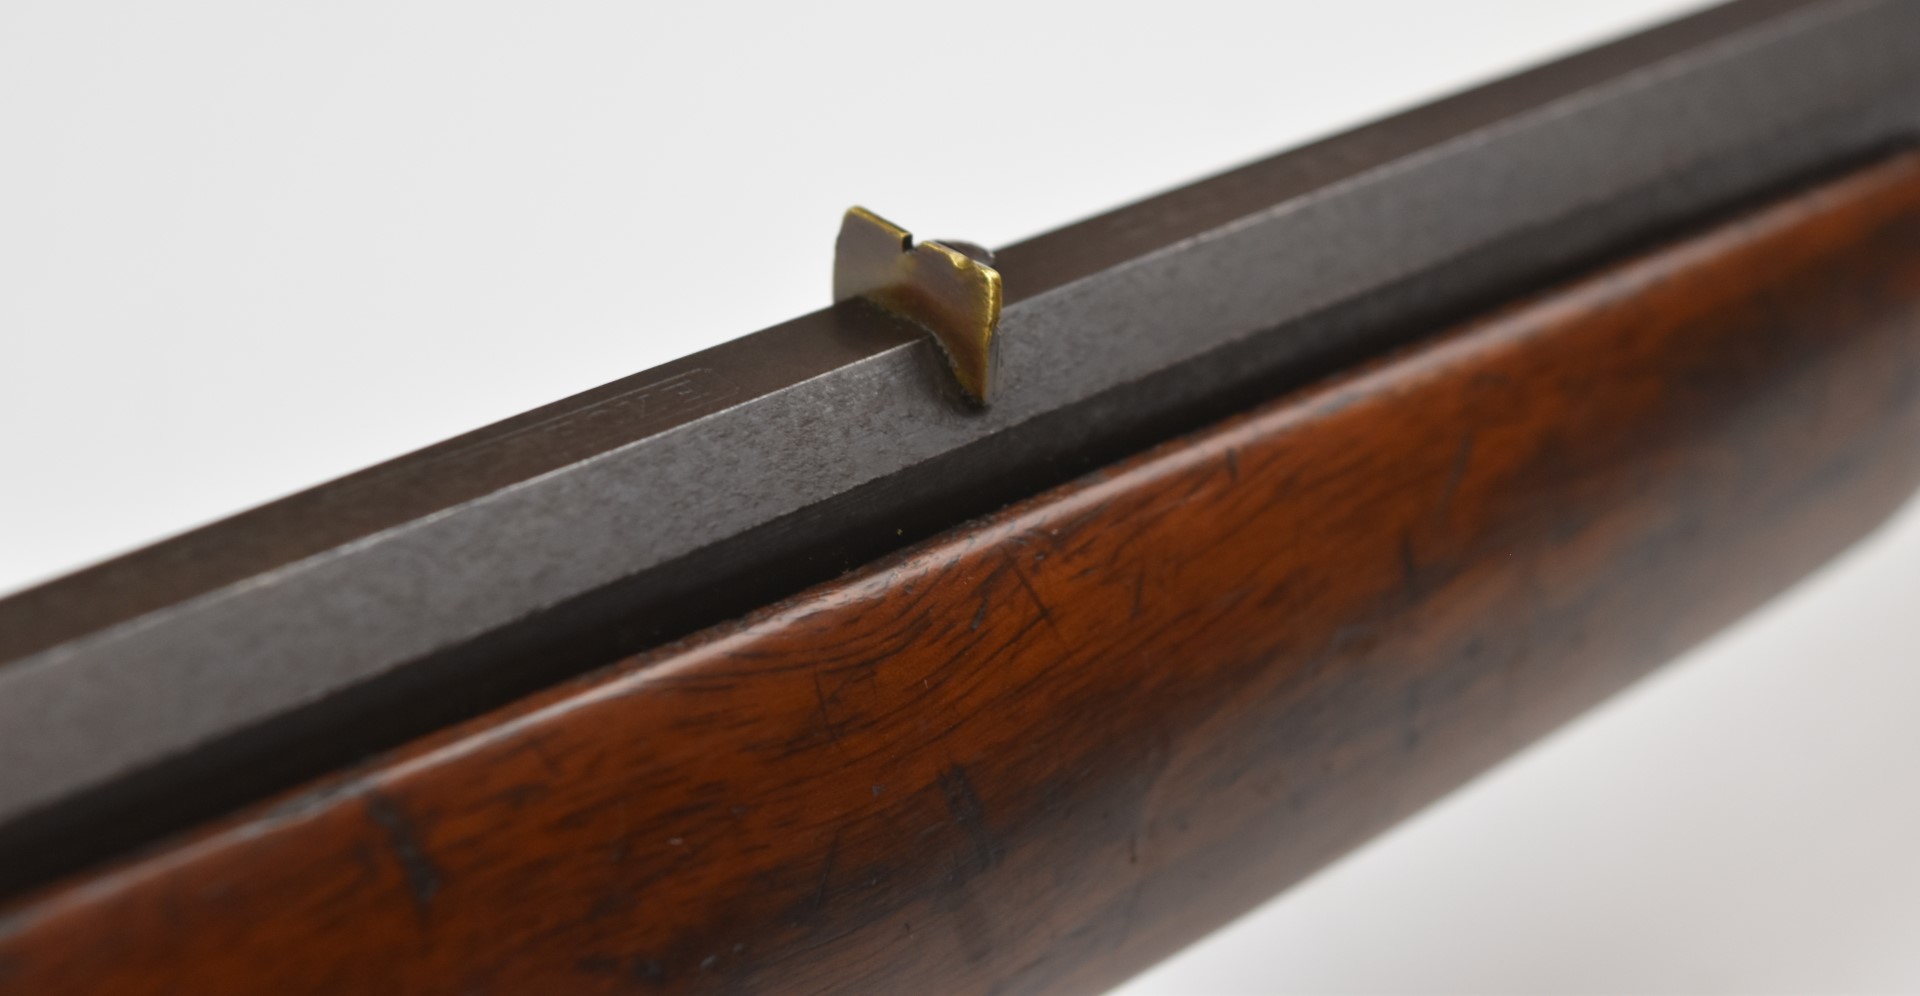 Lee-Nord Excellent C1 .22 pump-action air rifle with raised cheek-piece to the stock, adjustable - Image 9 of 17